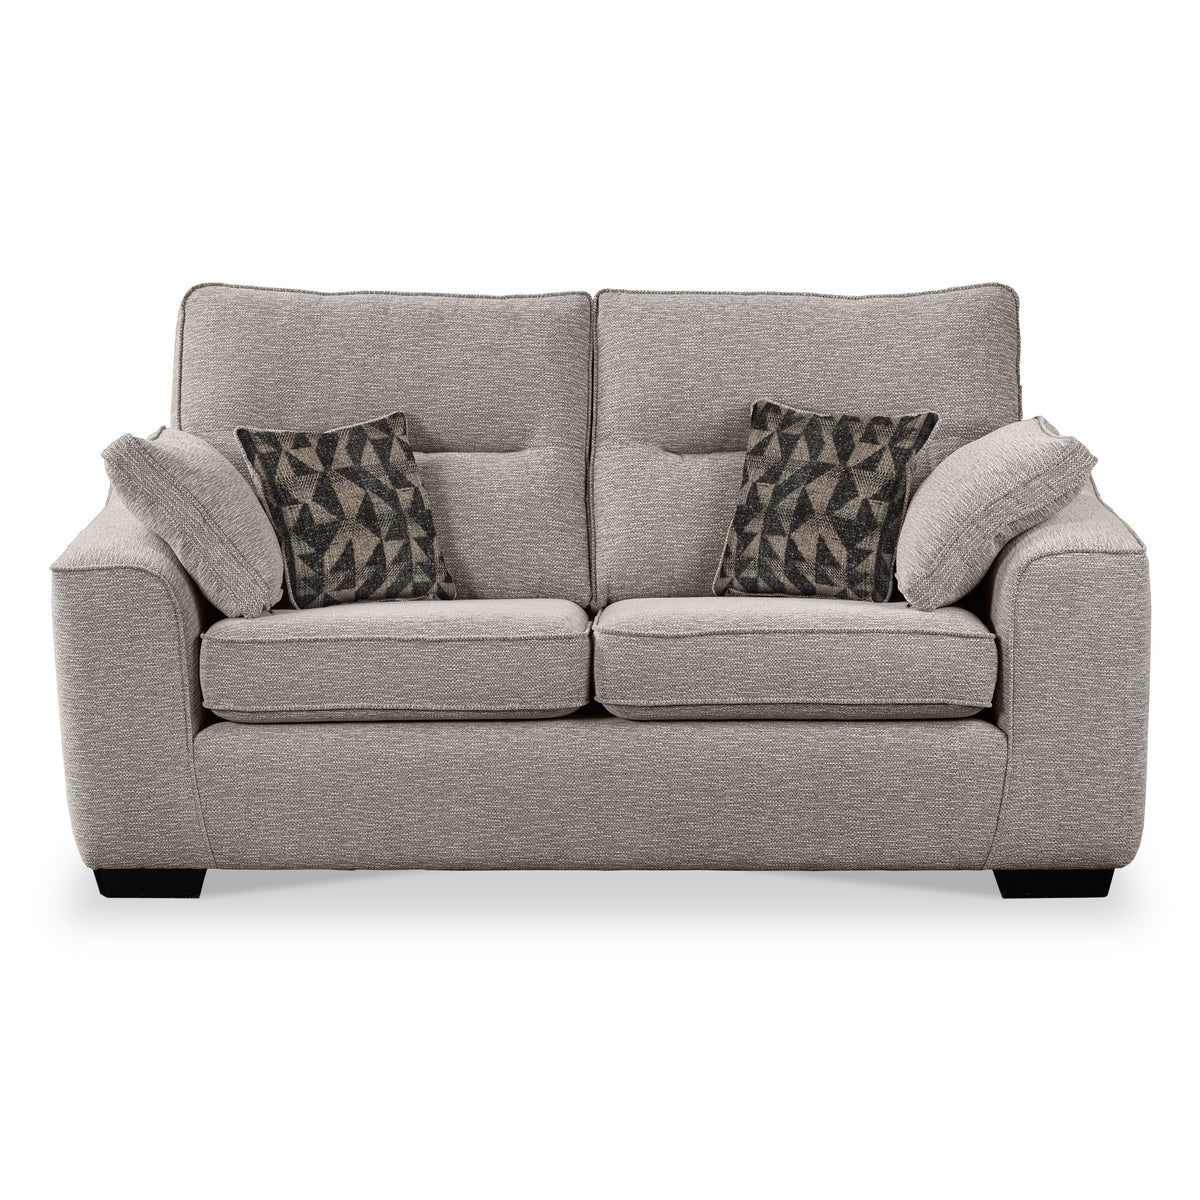 Sudbury Taupe 2 Seater Sofabed with Charcoal Scatter Cushions